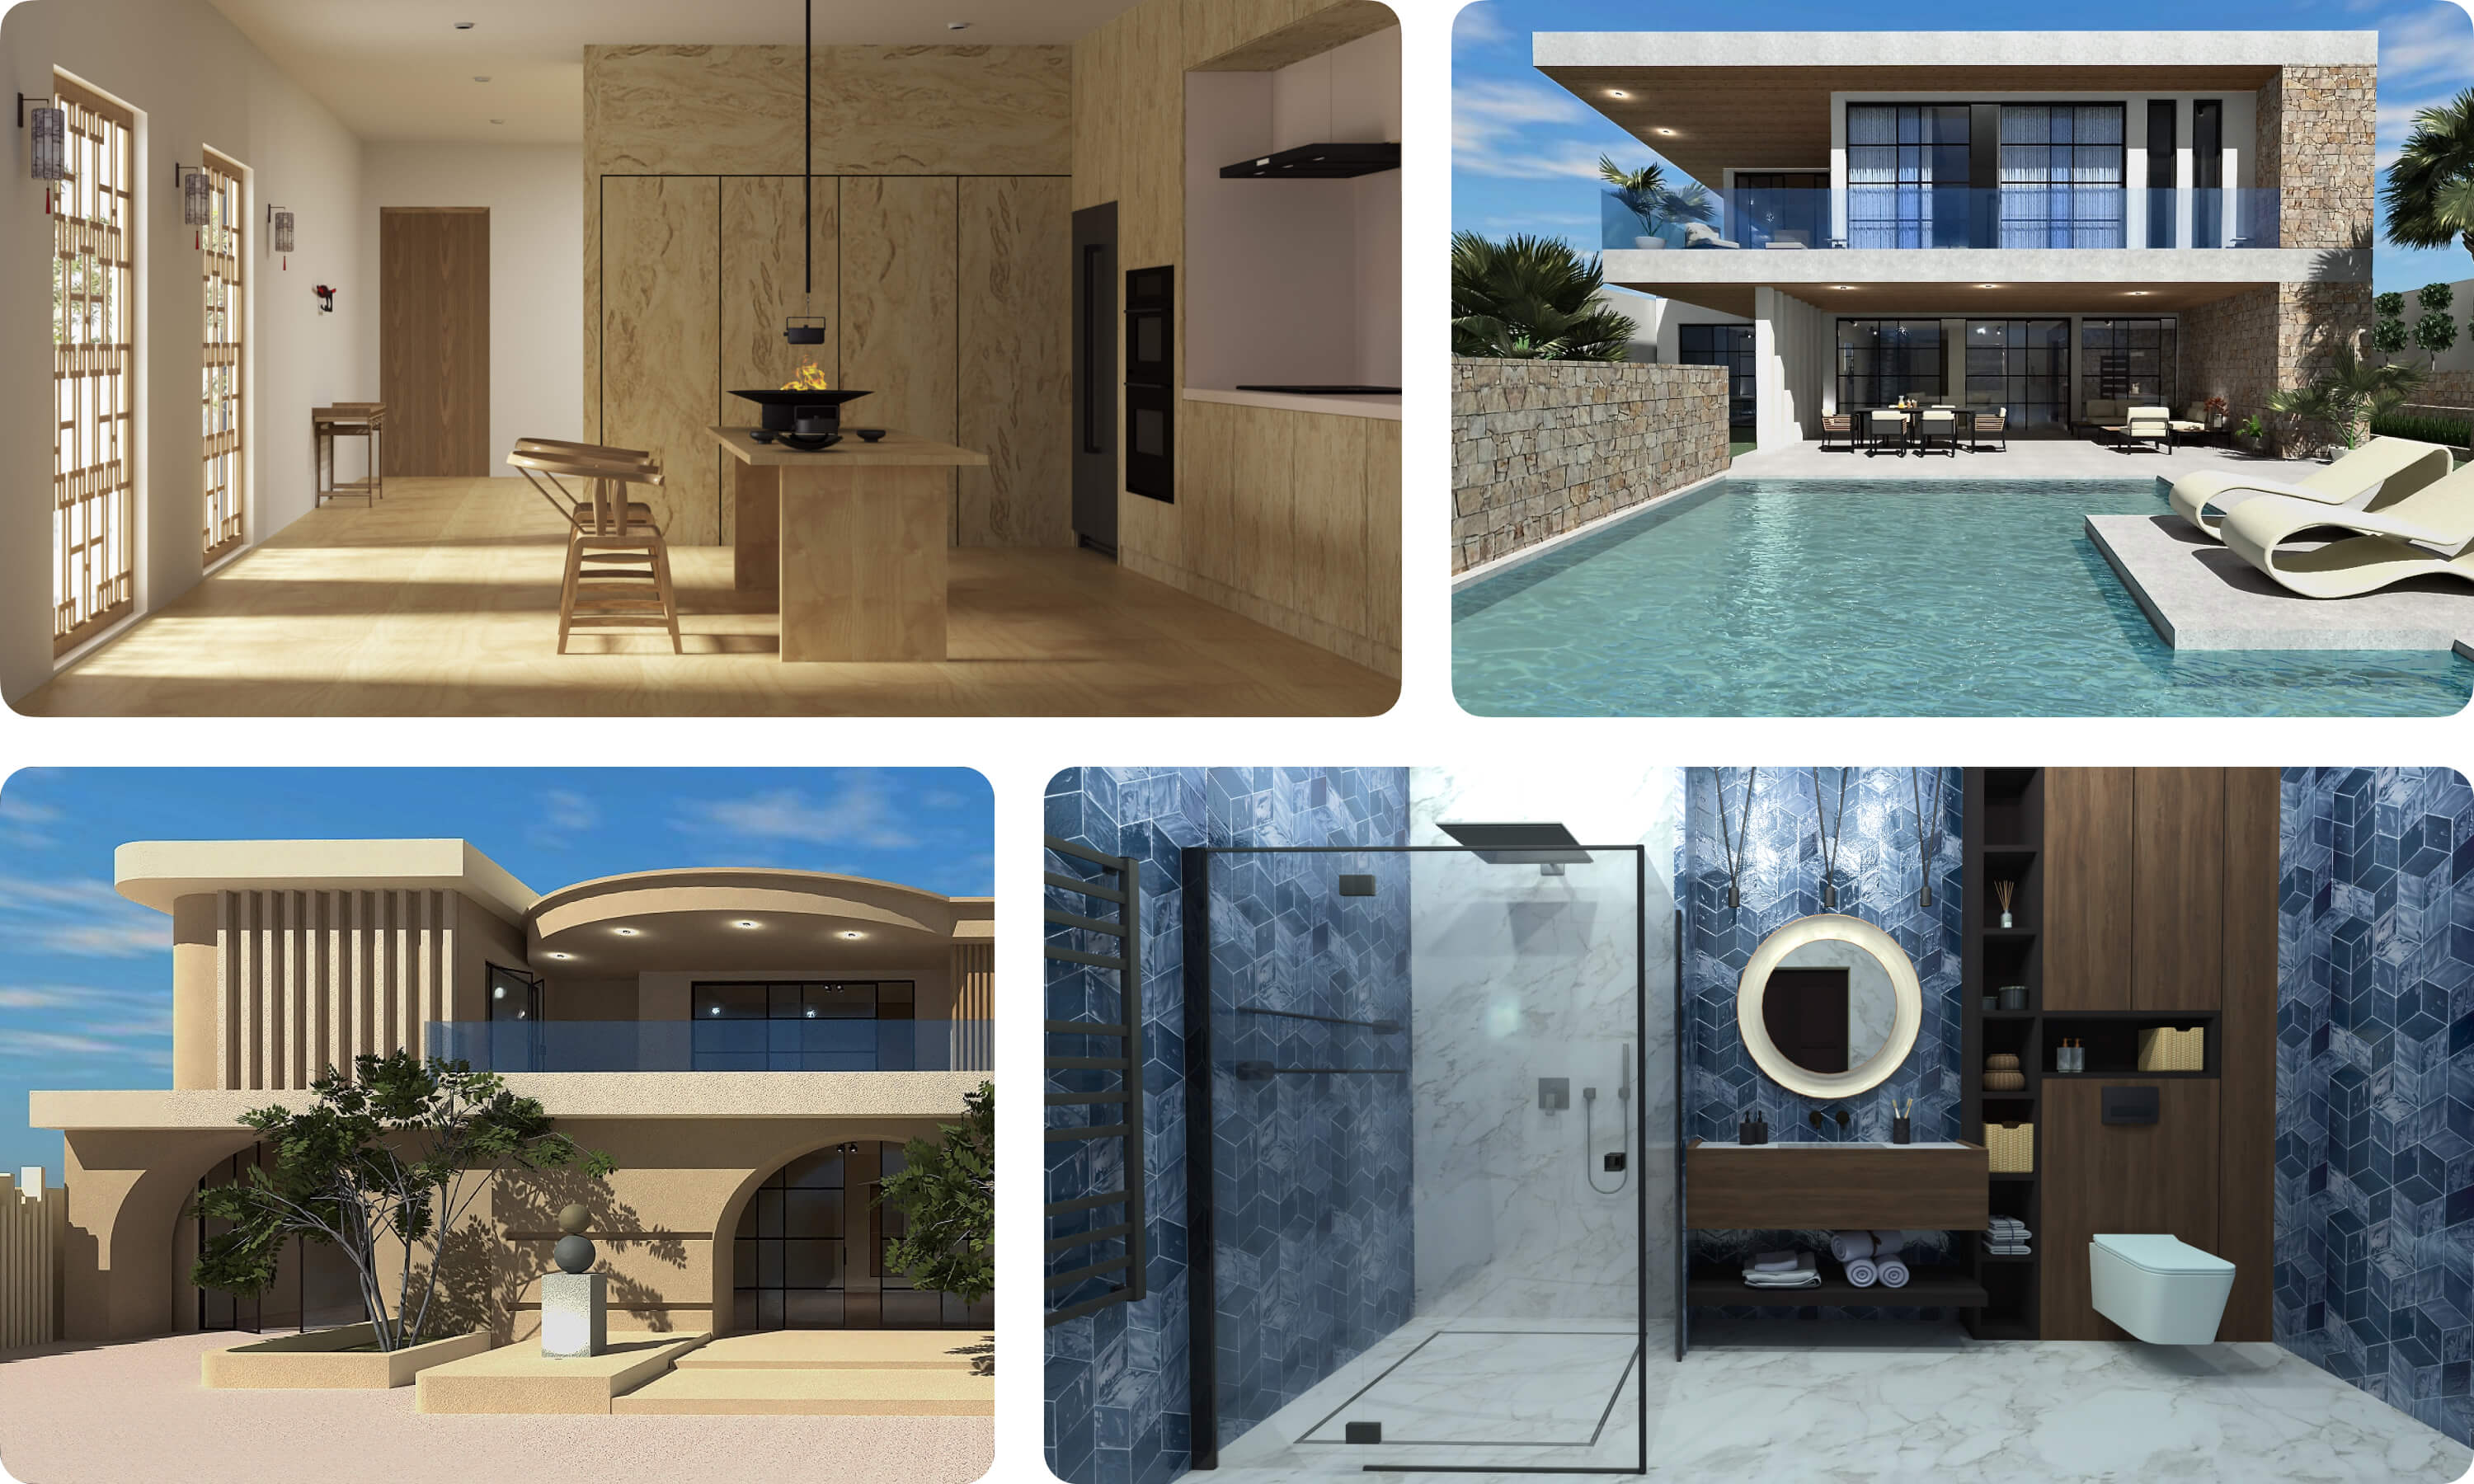 Designs of a kitchen, a bathroom and modern villas made in Live Home 3D.